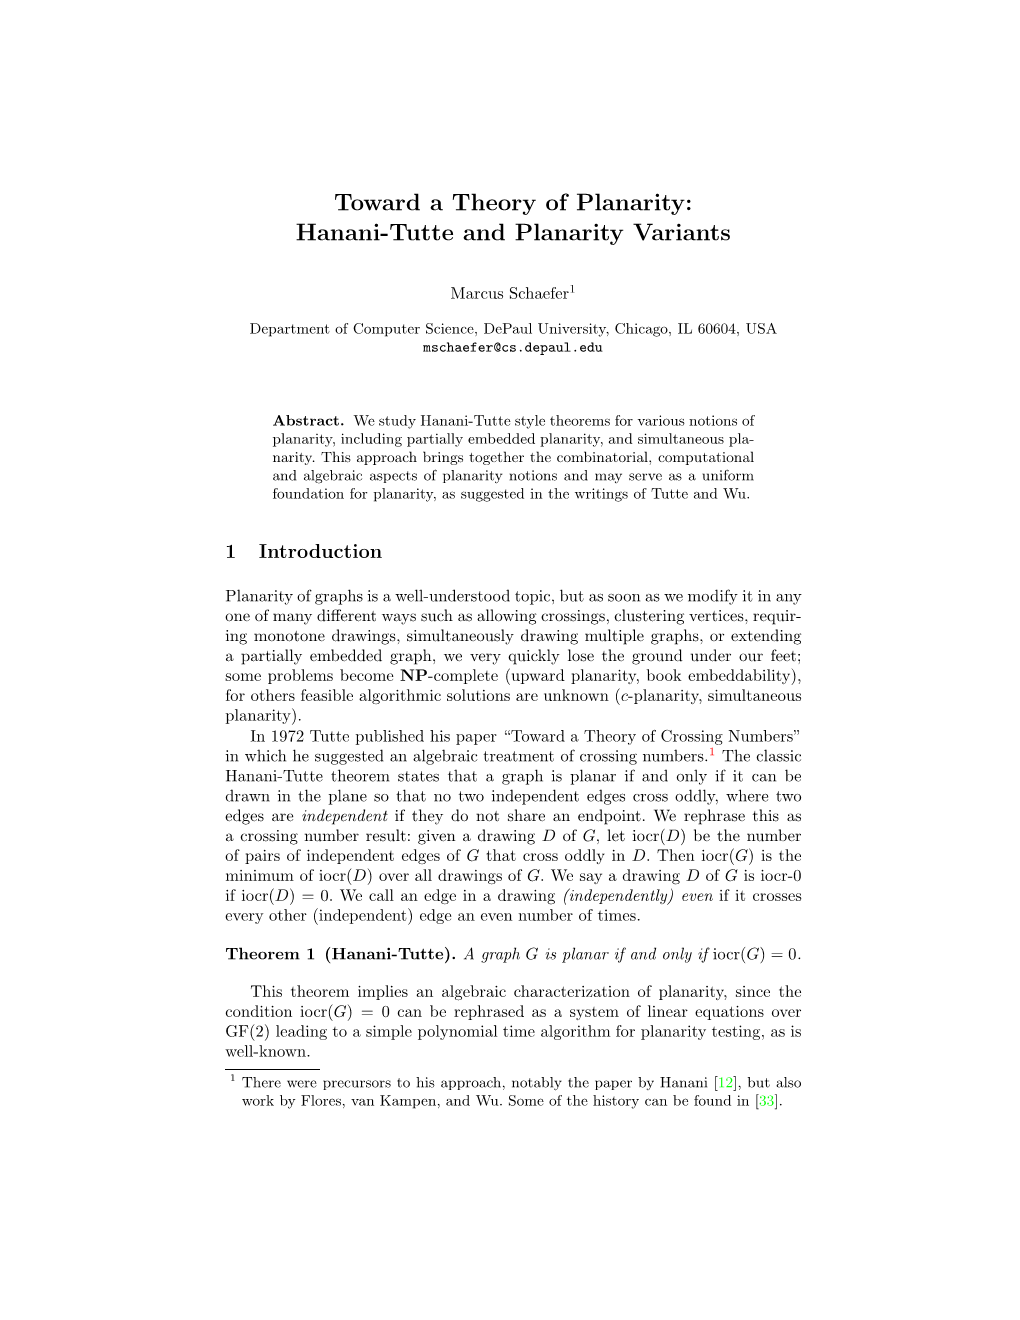 Toward a Theory of Planarity: Hanani-Tutte and Planarity Variants